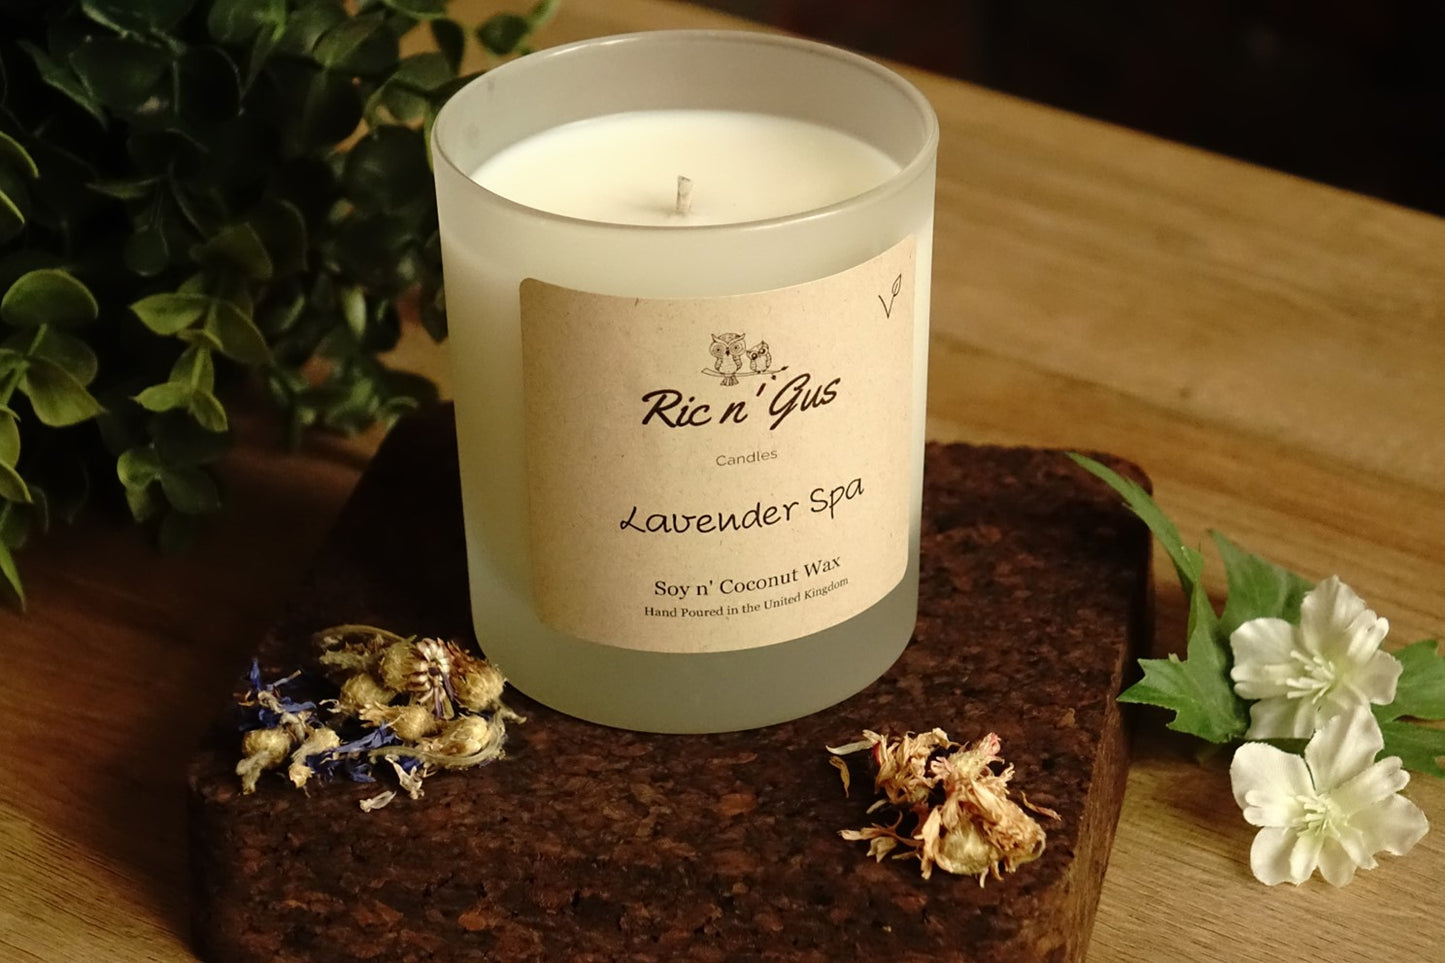 Lavender SPA Candle - Soy and Coconut Wax Ric n'Gus Candles